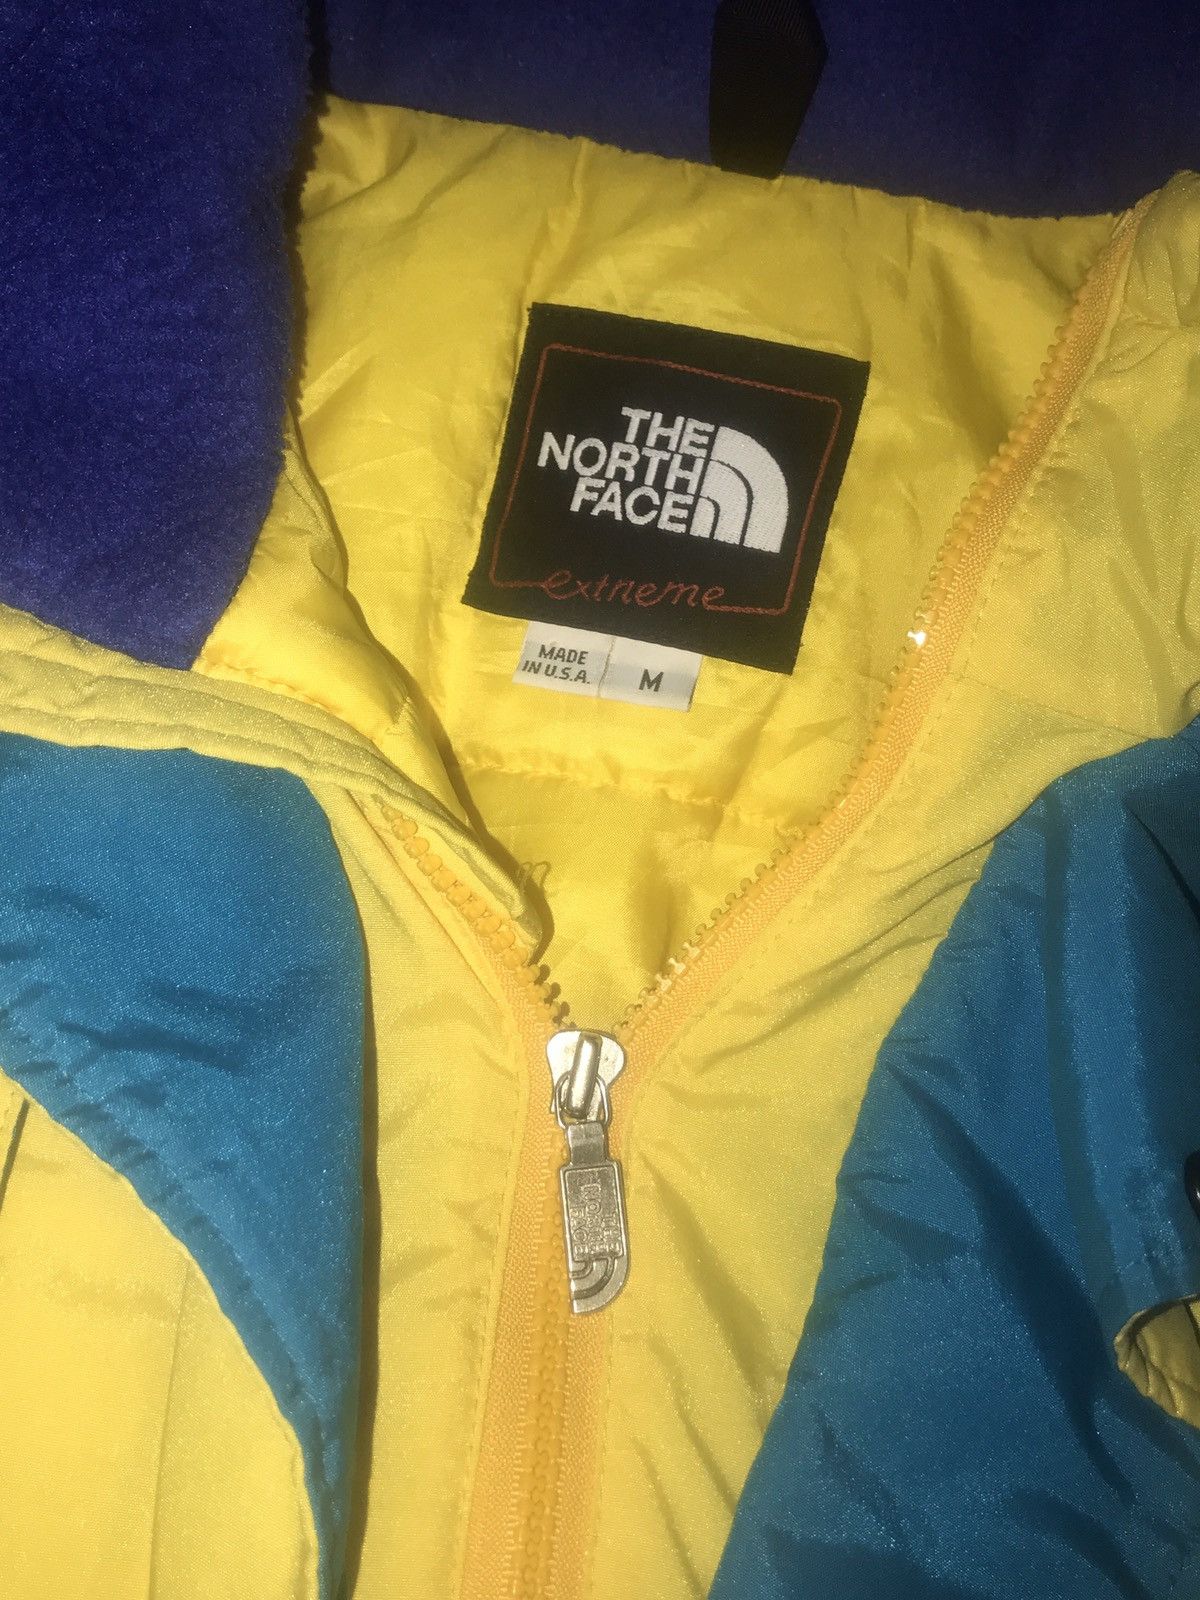 The North Face Vintage the north face extreme jacket Size US M / EU 48-50 / 2 - 2 Preview